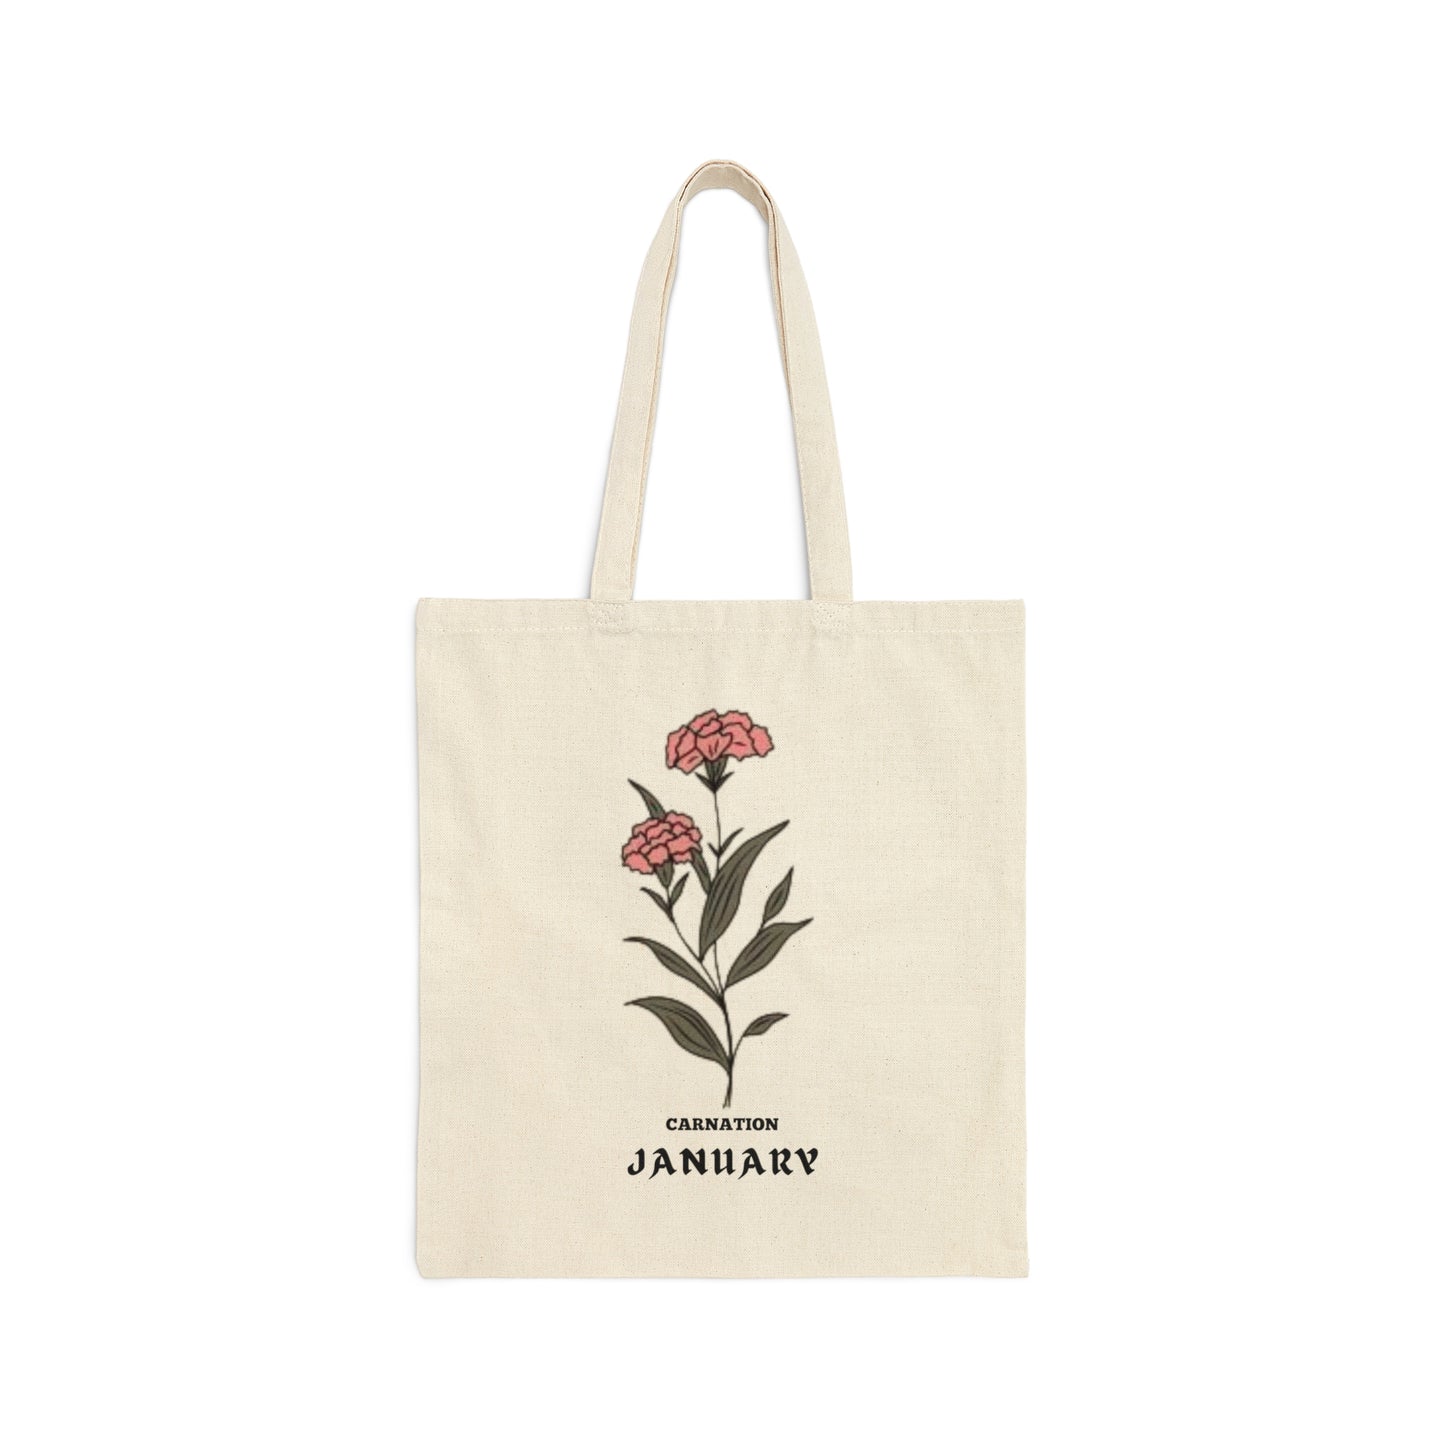 JANUARY BIRTH MONTH FLOWER TOTE (CARNATION)